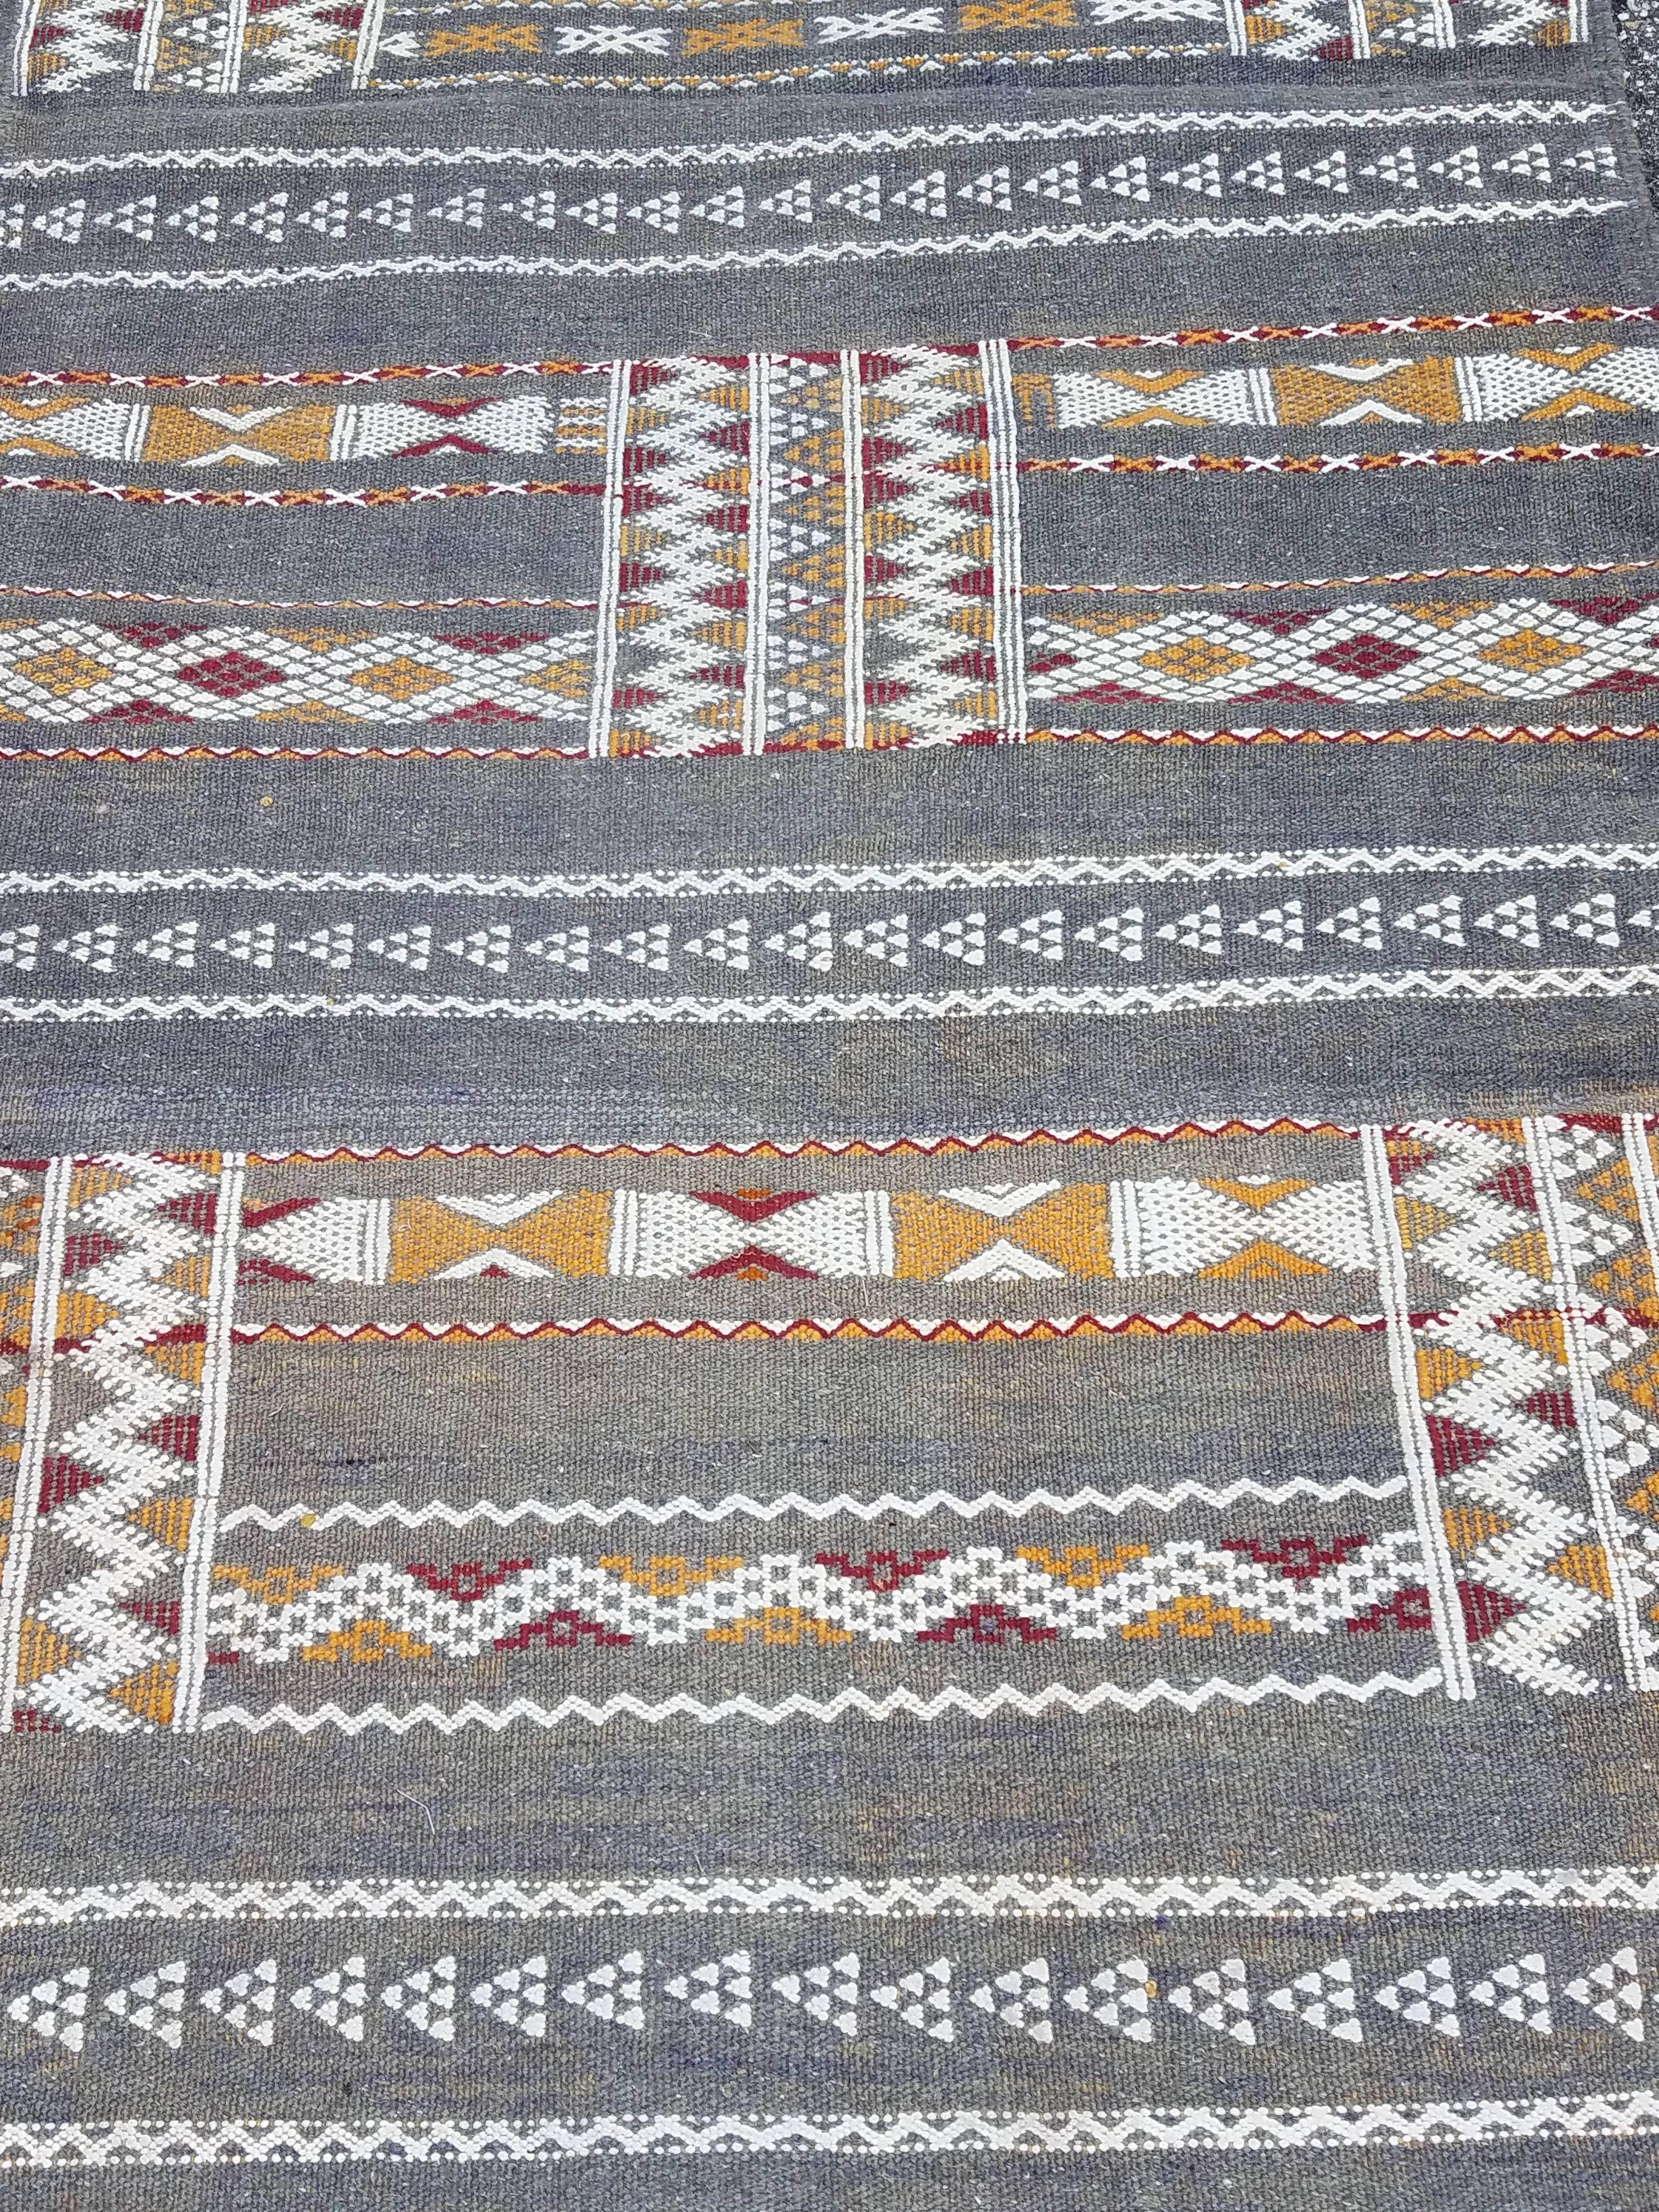 Multi-color Moroccan Berber runner / rug. Excellent handcraftsmanship. Priced to sell. Measuring approximately 93 inches long and 32 inches wide, this amazing rug comes from the Atlas mountains of Morocco. It would be a great addition to your home